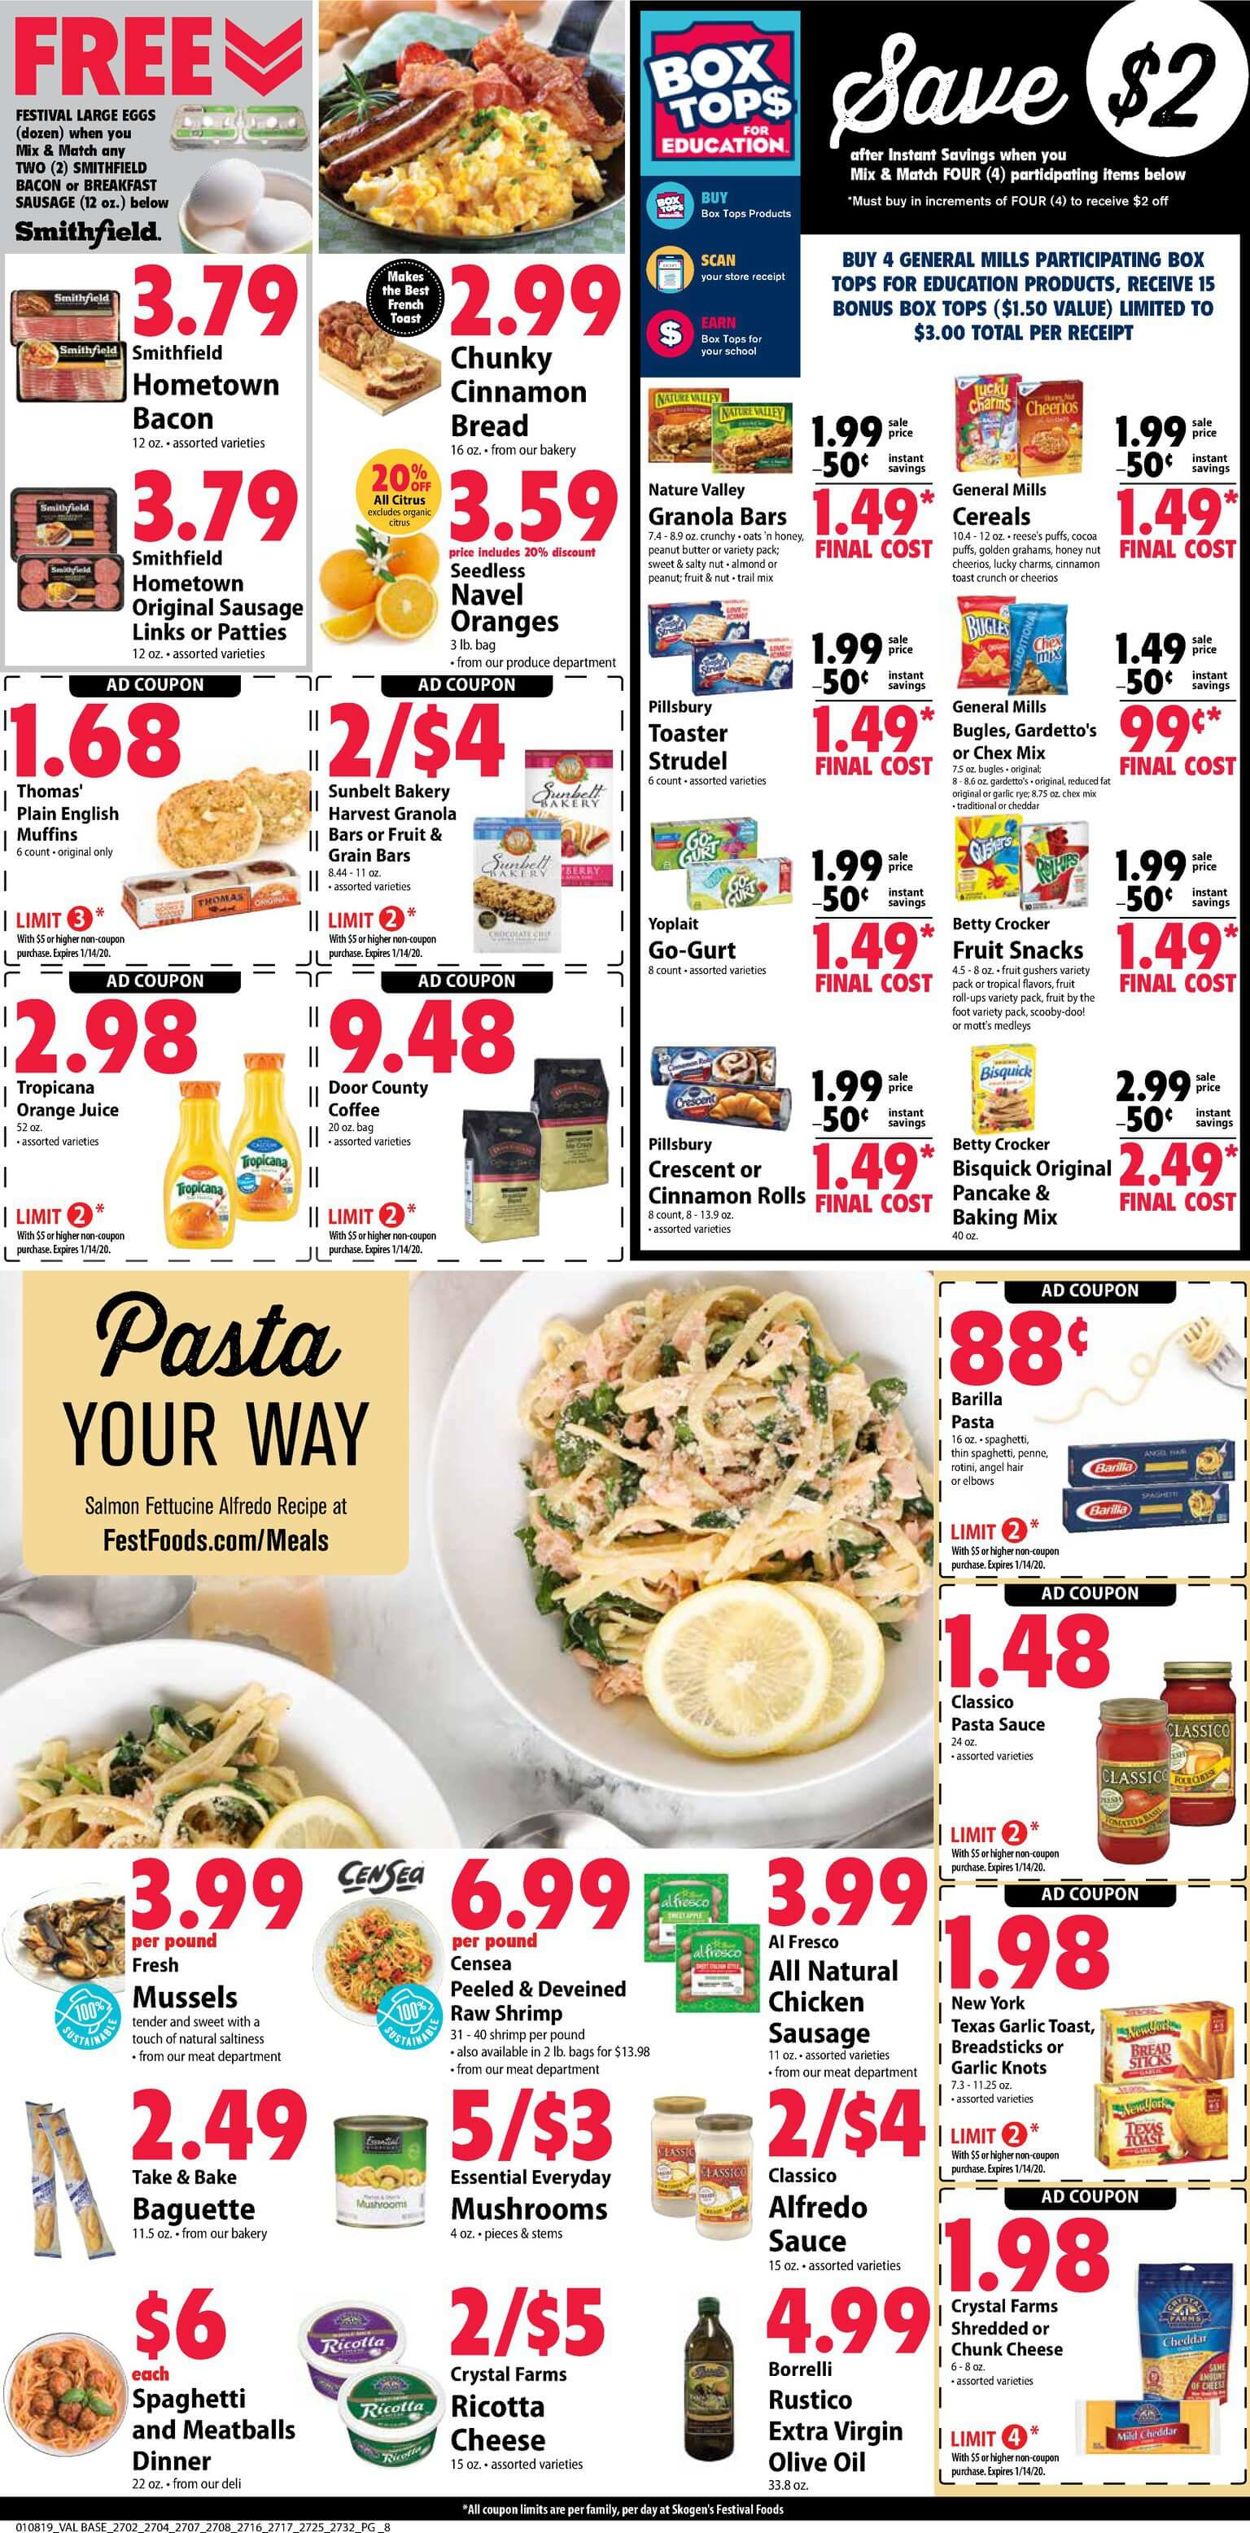 Festival Foods Current weekly ad 01/08 - 01/14/2020 [8] - frequent-ads.com